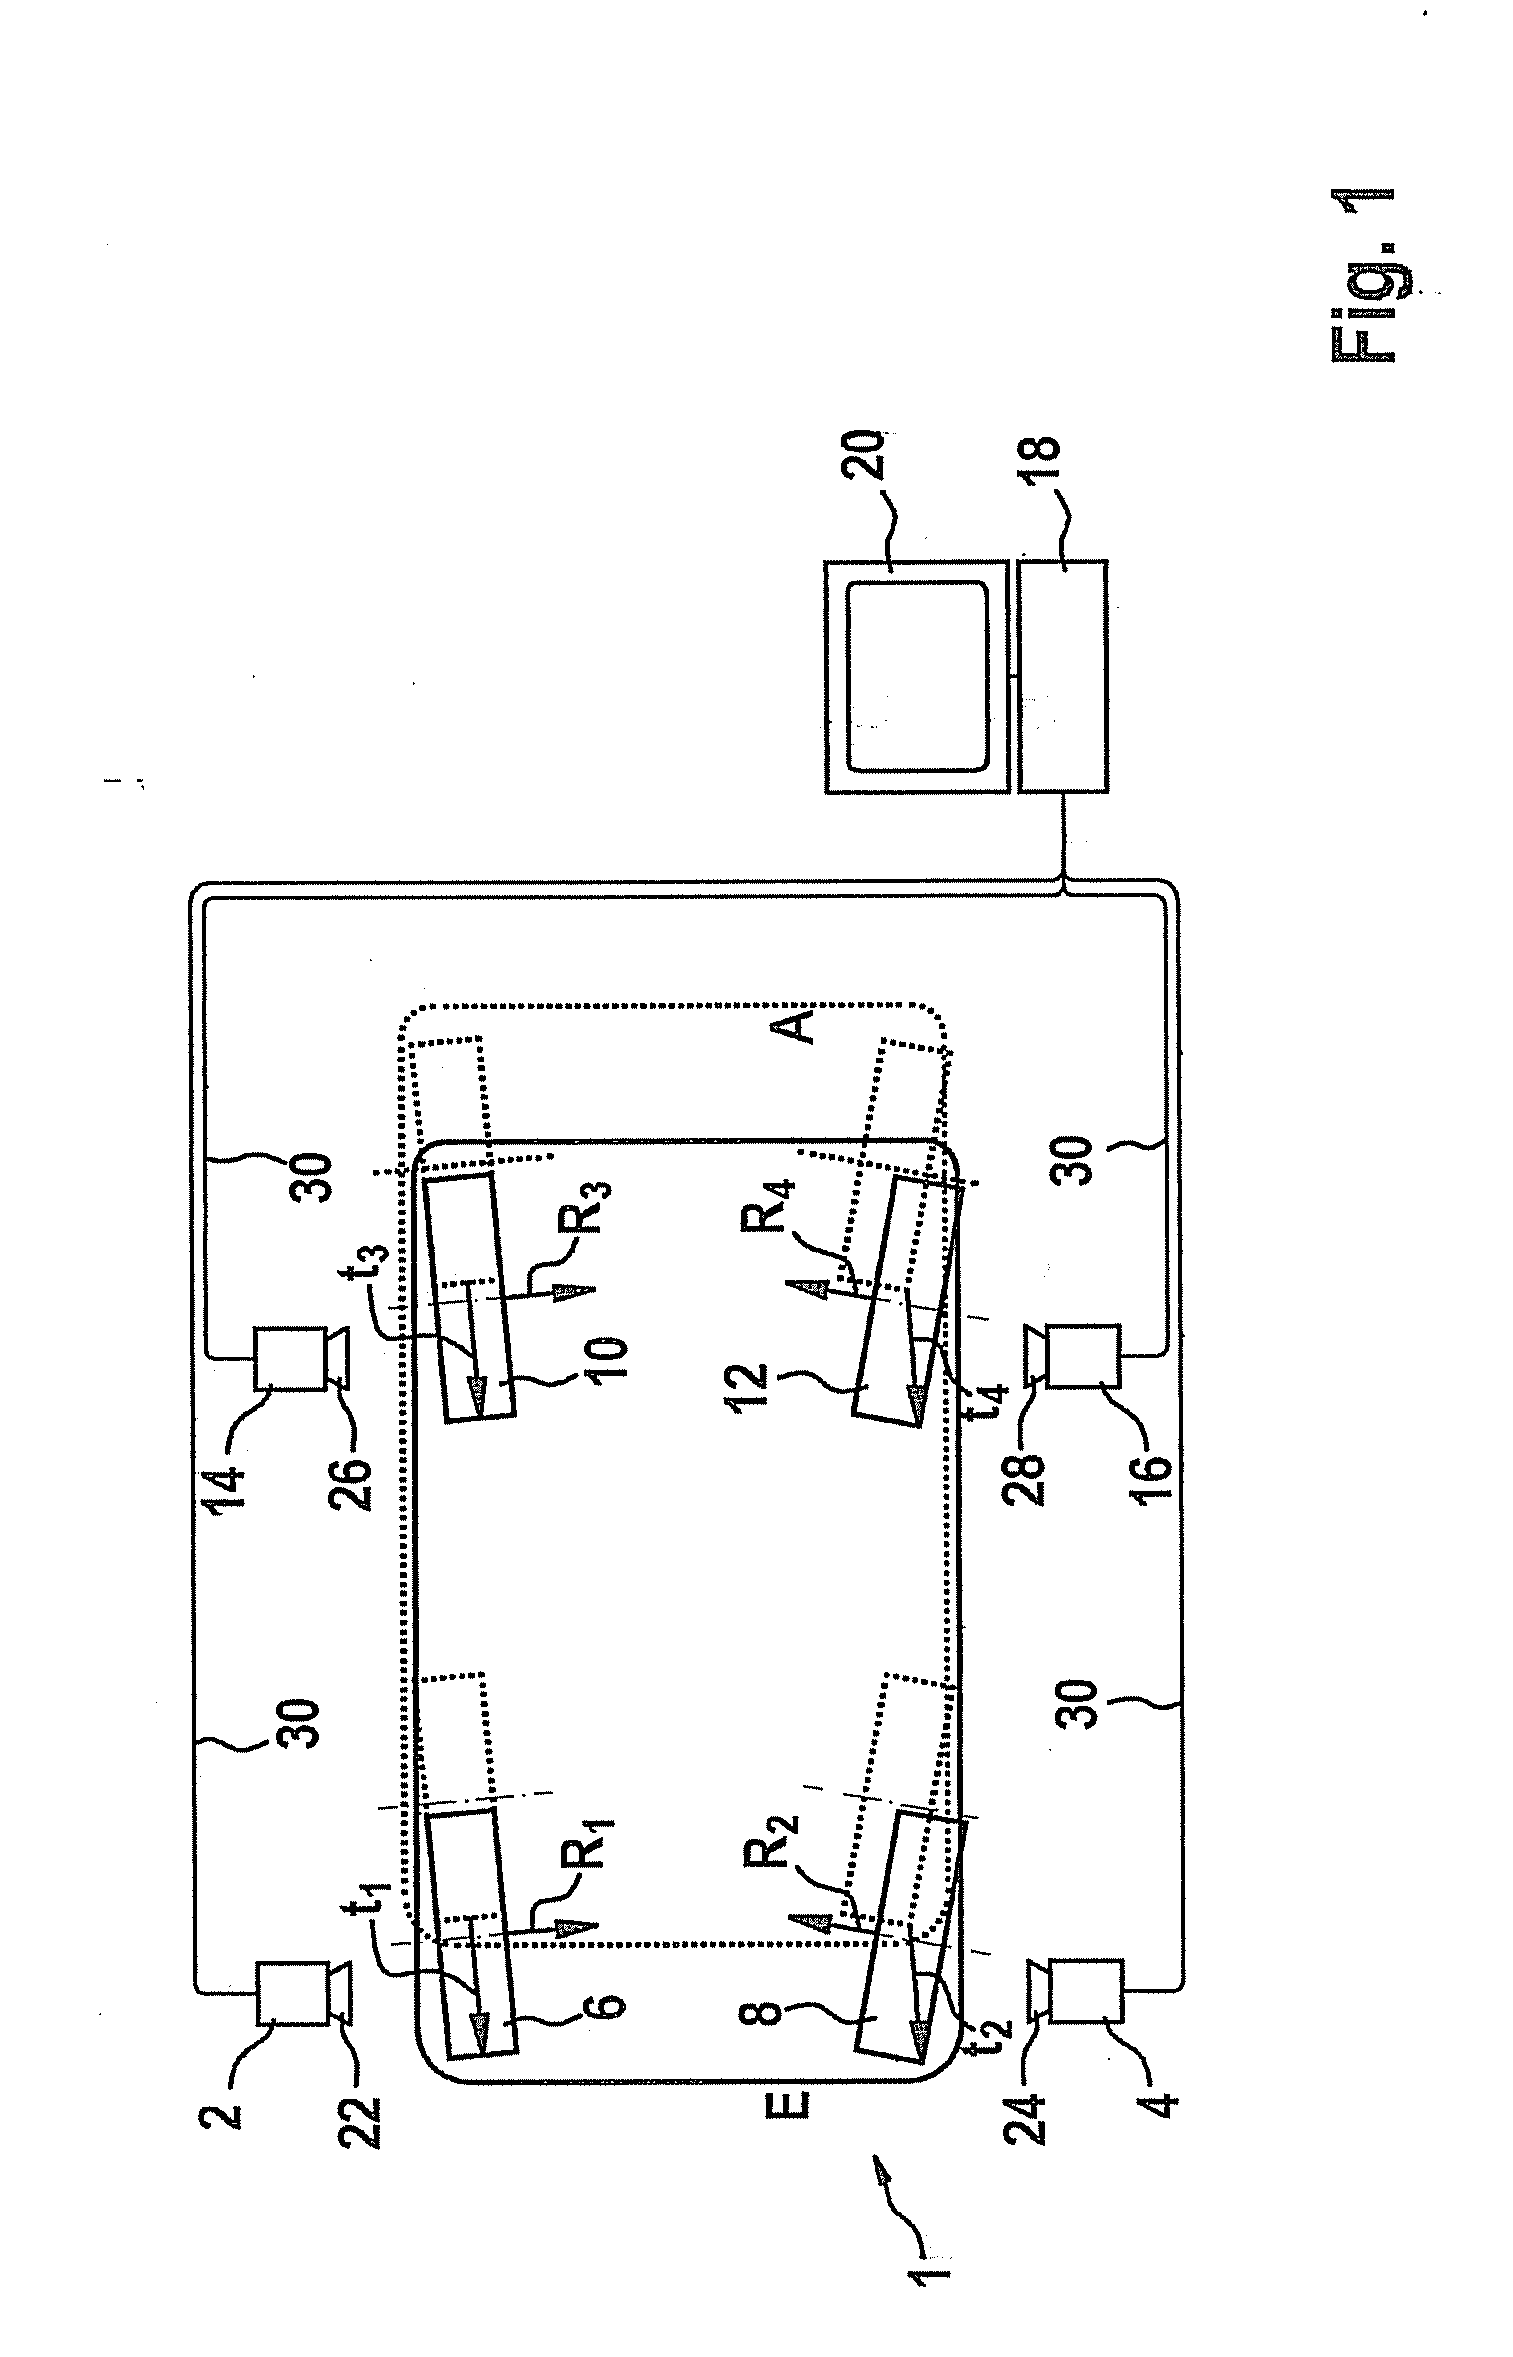 Method for wheel suspension measurement and a device for measuring the wheel suspension geometry of a vehicle